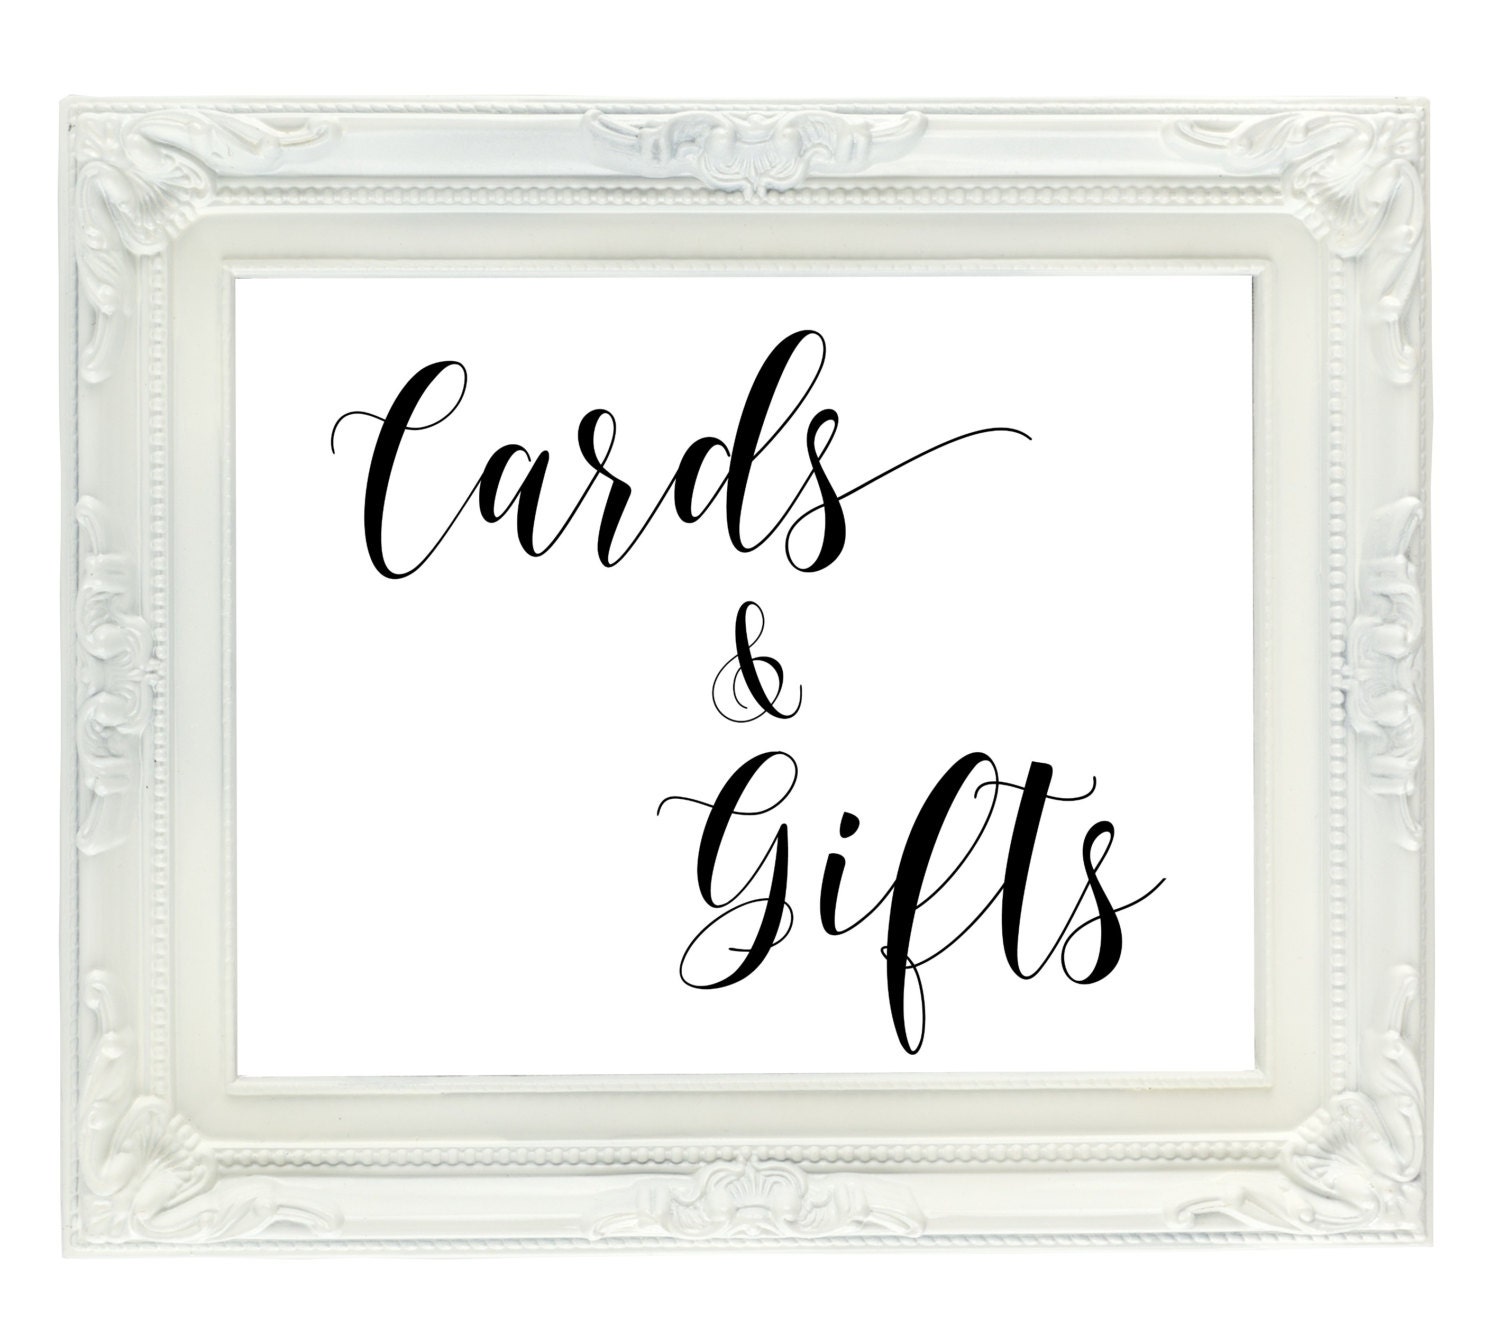 cards-gifts-wedding-sign-printable-wedding-sign-gift-table